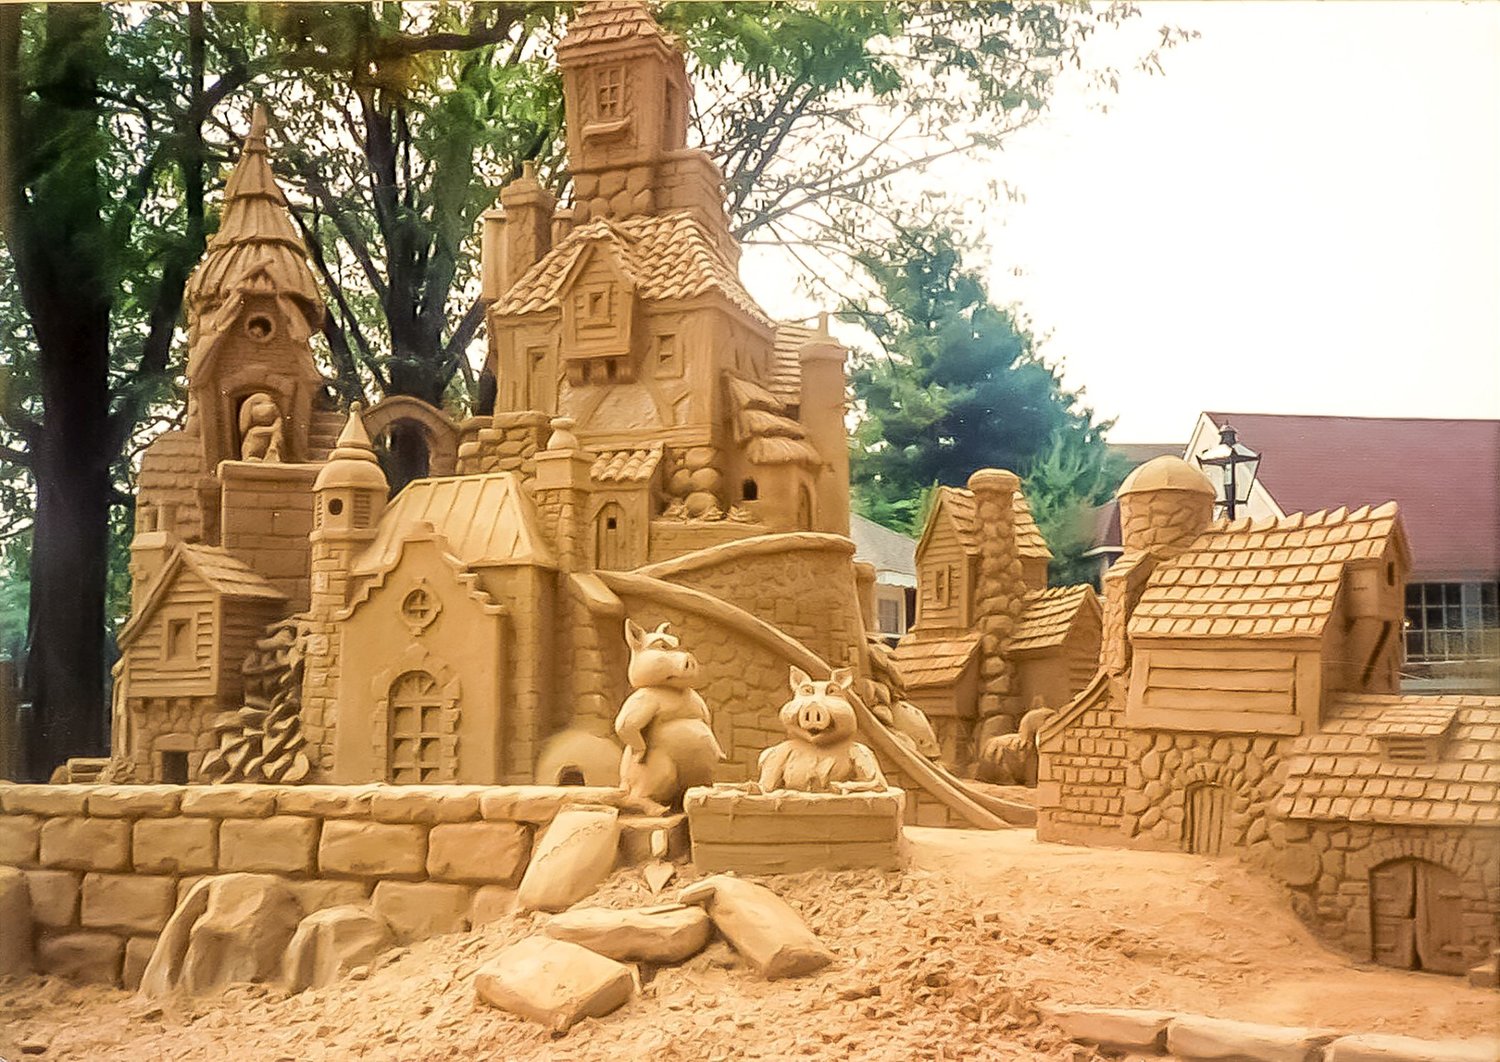 A sand sculpture created some years ago at Peddler’s Village. New sculptures will be created beginning May 21, as part of the village’s 60th anniversary celebration.